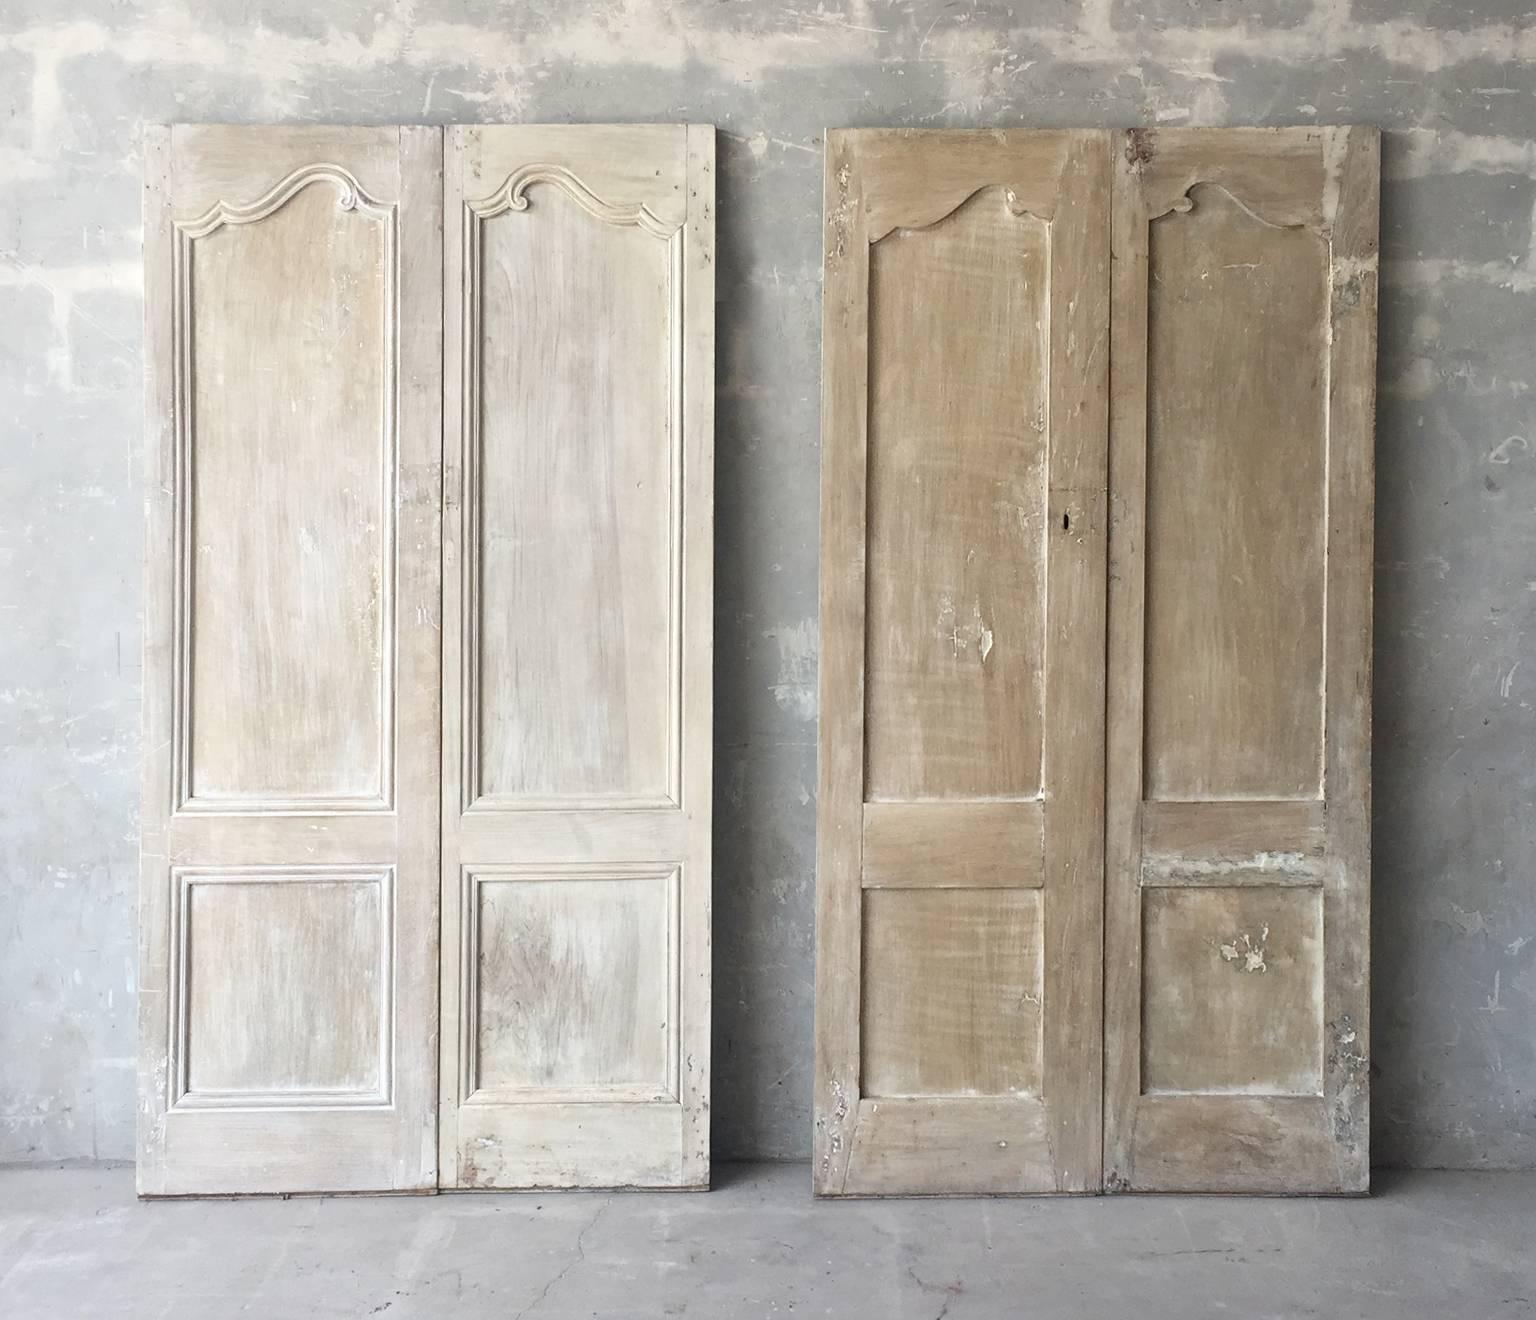 This is a lovely set of two pairs of antique cabinet doors. They boast reclaimed hardware and a natural wood finish. This small set is from the 18th century from a Maison de Ville in Beziers, France. They would perfectly flank any casual living